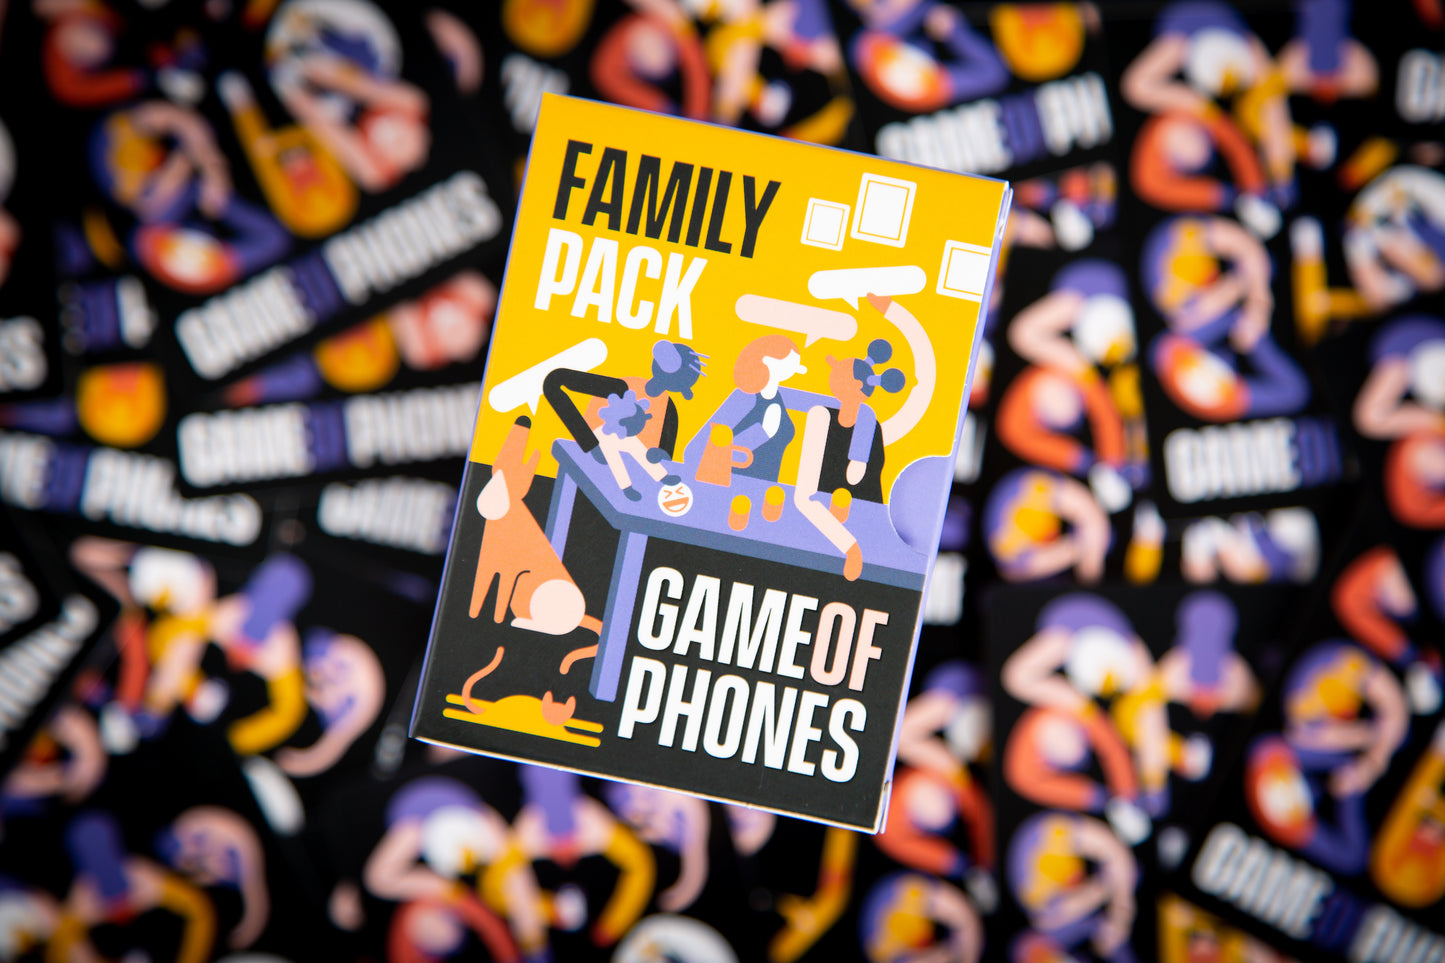 Game of Phones: The Family Mini Pack